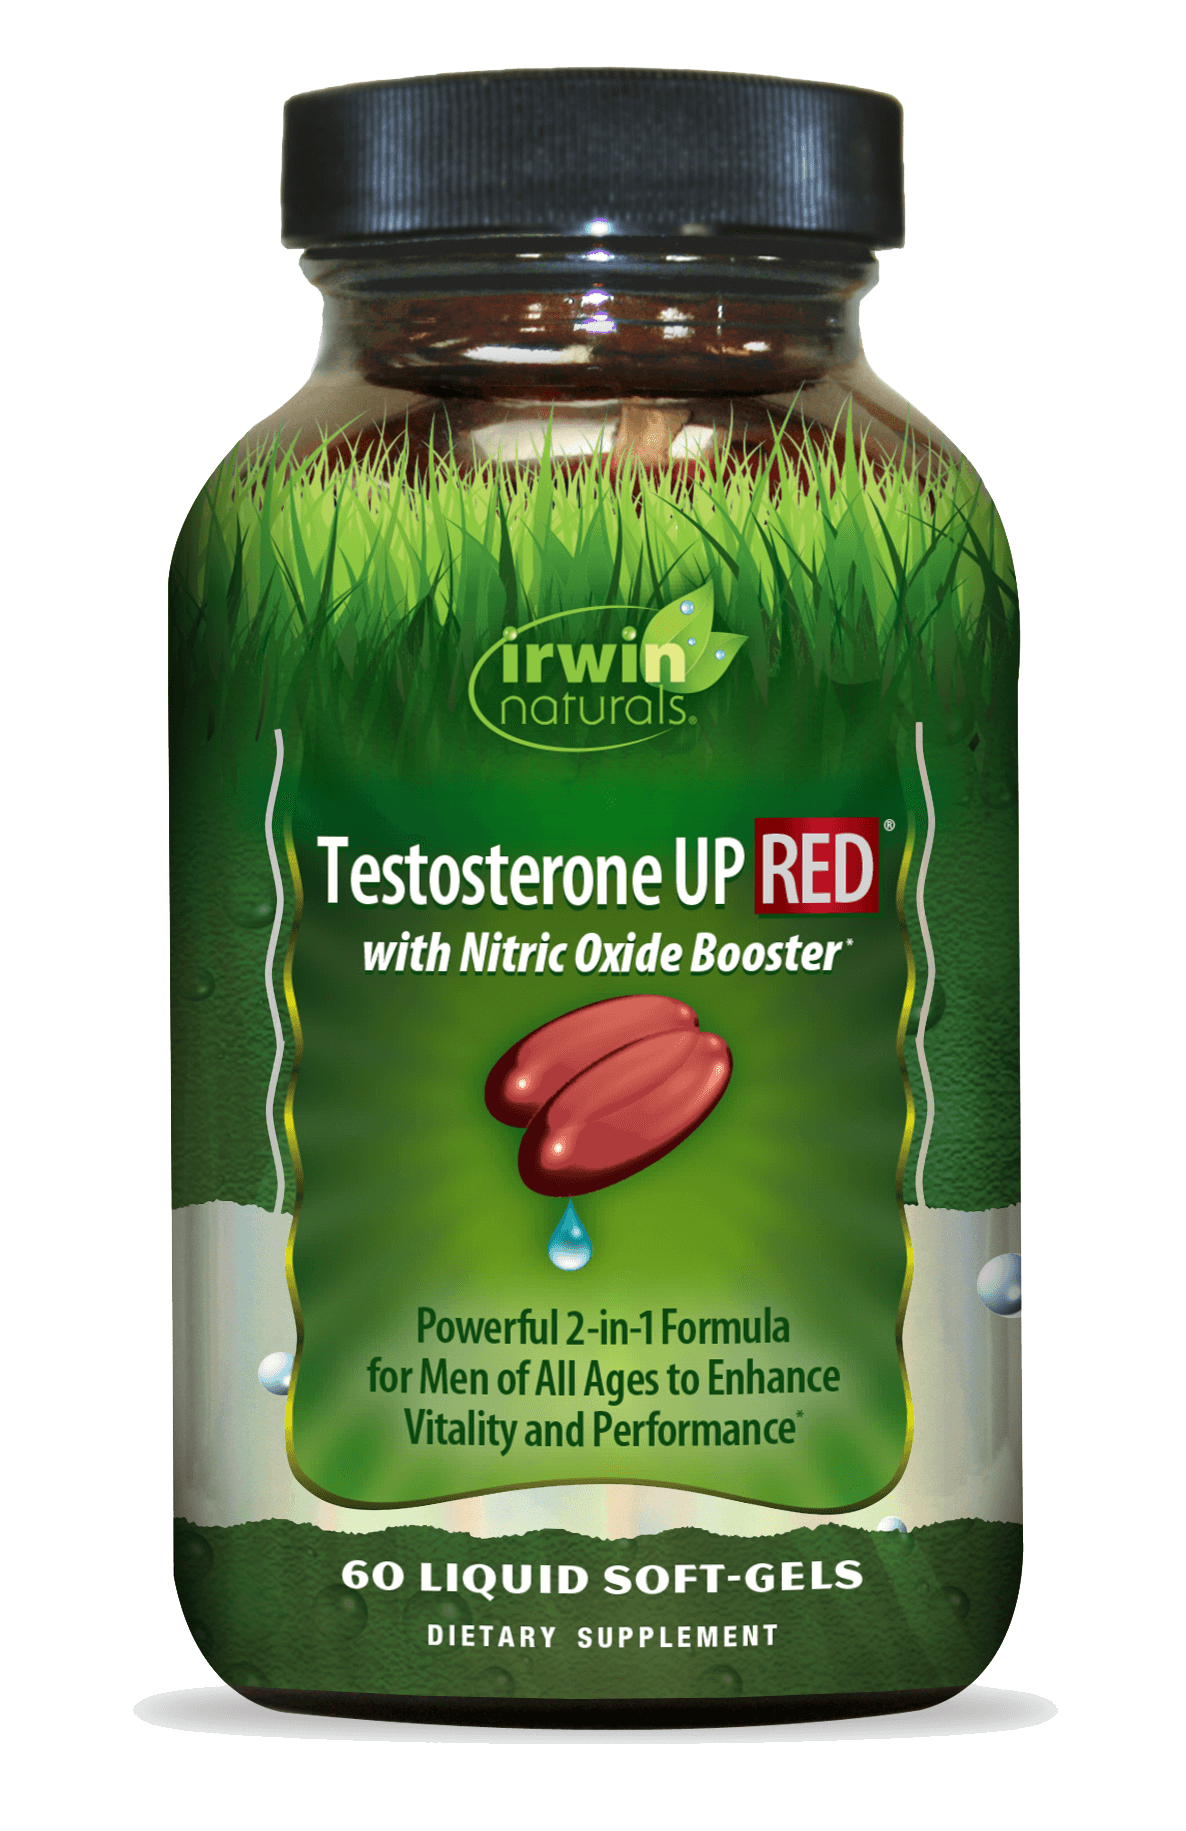 Testosterone UP RED with Nitric Oxide Booster by Irwin Naturals